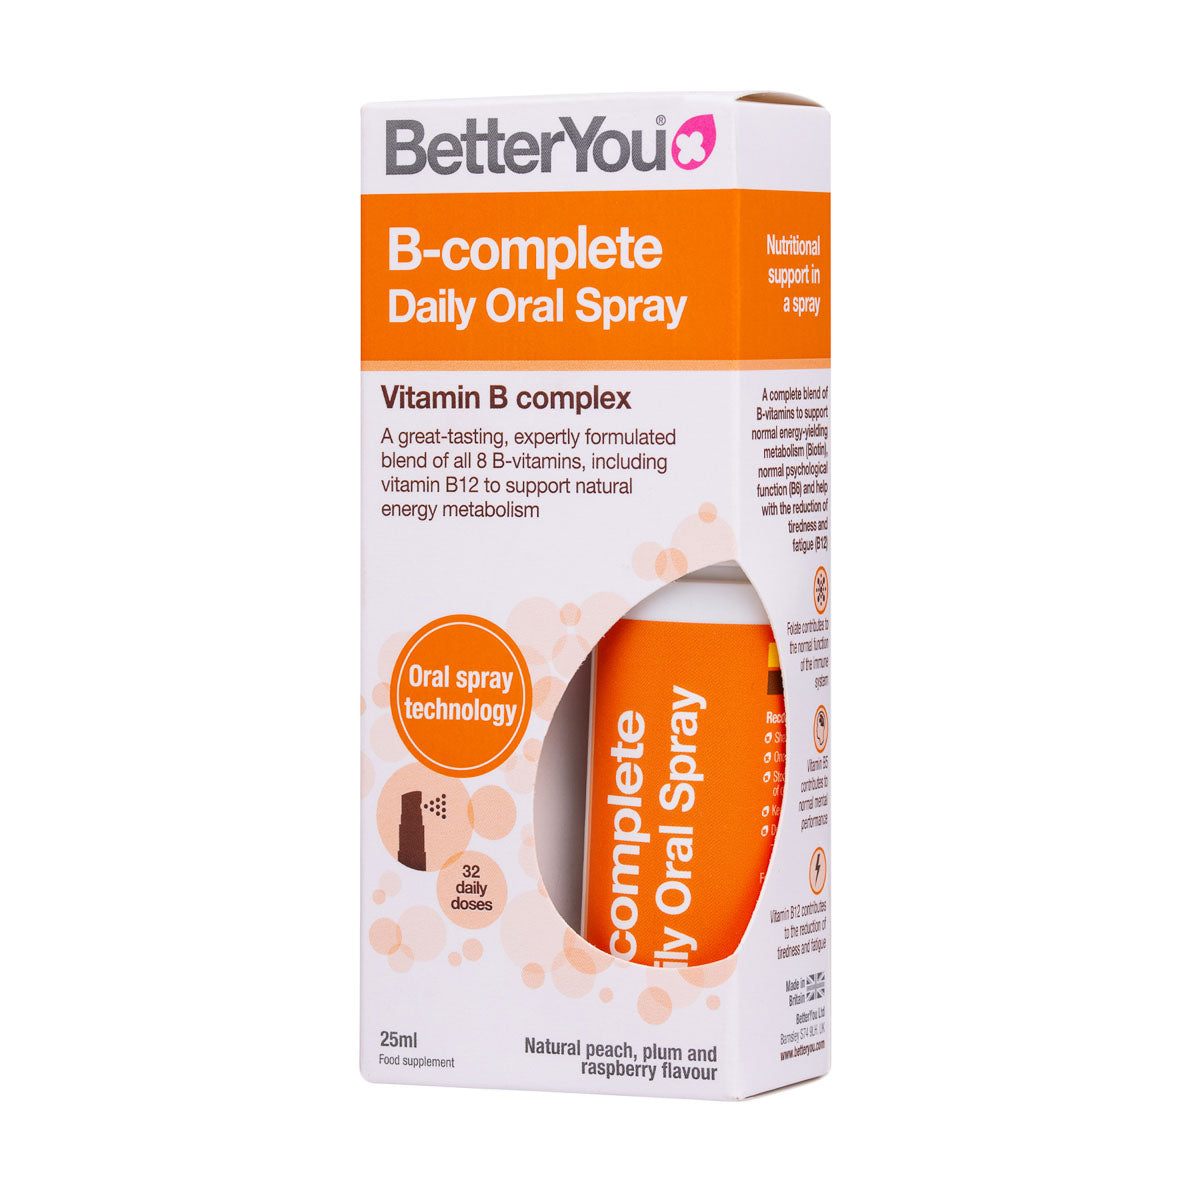 B Complete Daily Oral Vitamin B Spray Vegan (25ml) | Better You | Raw Living UK | Supplements | BetterYou B-complete Oral Spray is a great-tasting, expertly formulated blend of all 8 B vitamins, including Vitamin B12 to support Natural Energy Metabolism.